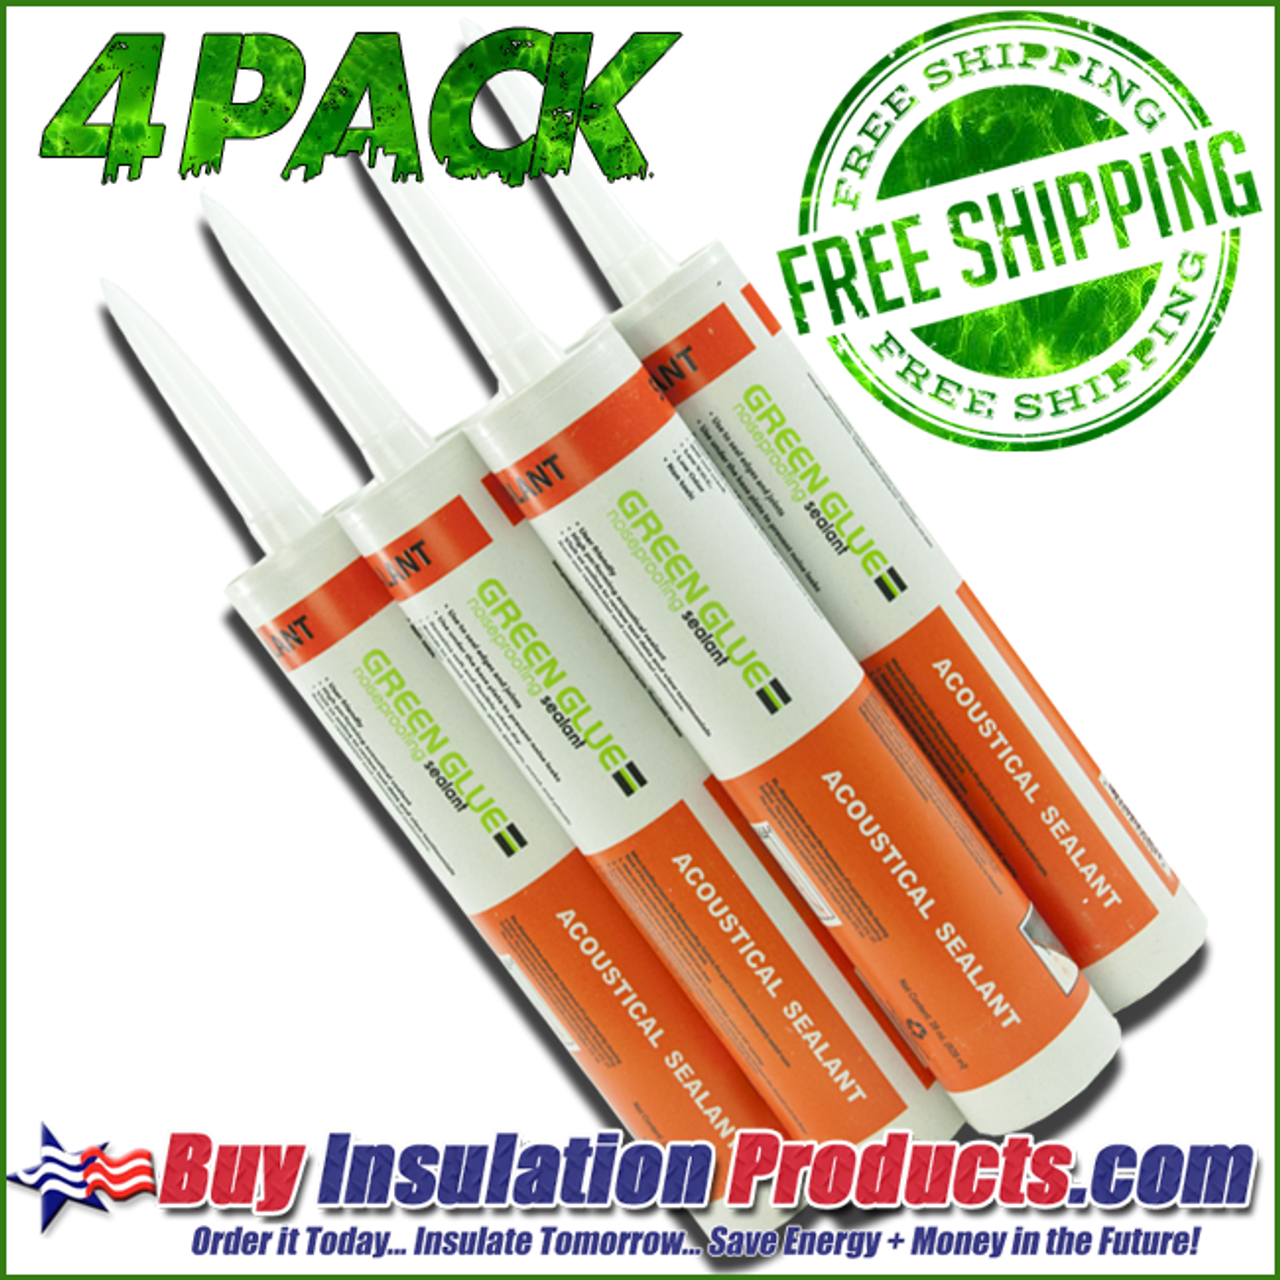 SOUNDPROOFING - GREEN GLUE - 6 PACK - COVERS 96 SQ. FEET.